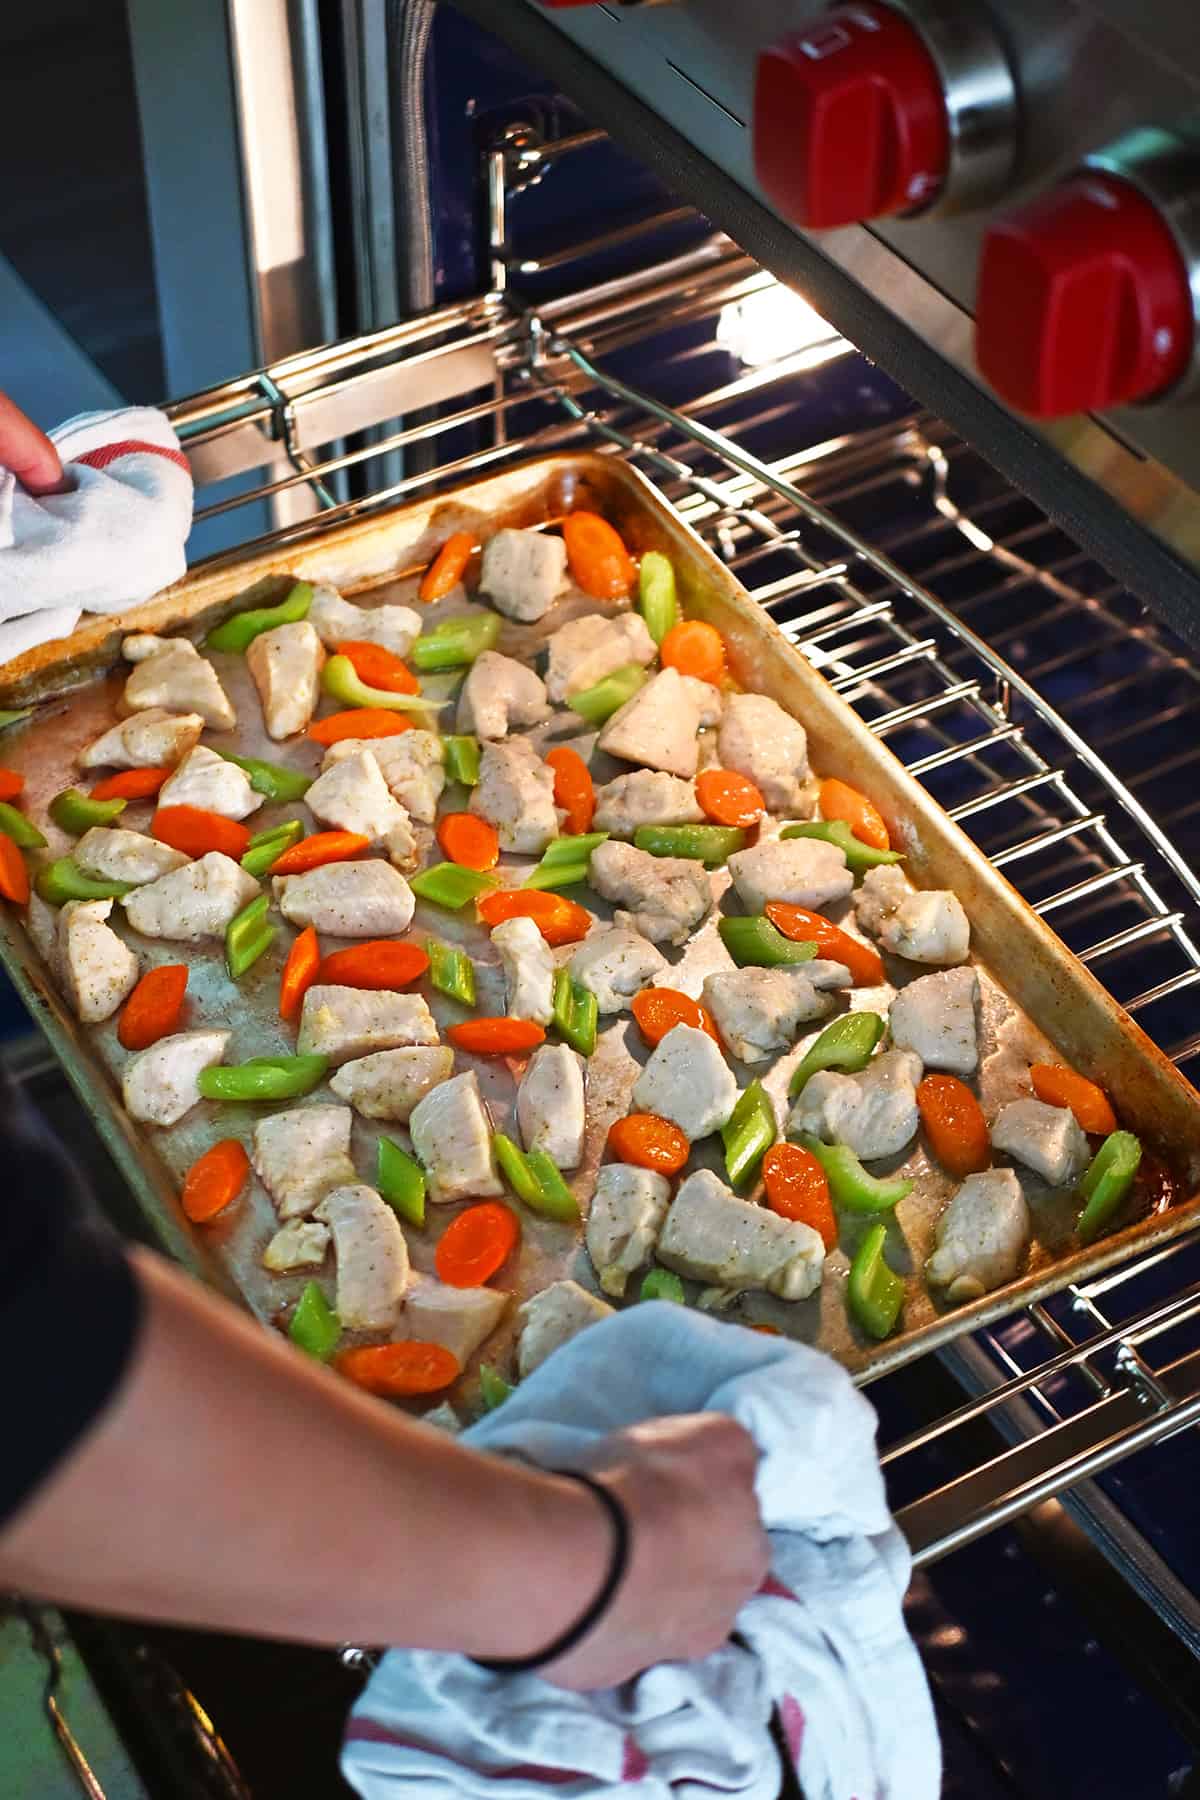 Removing a sheet pan from the oven with cooked chicken breast cubes, sliced carrots, and sliced celery.